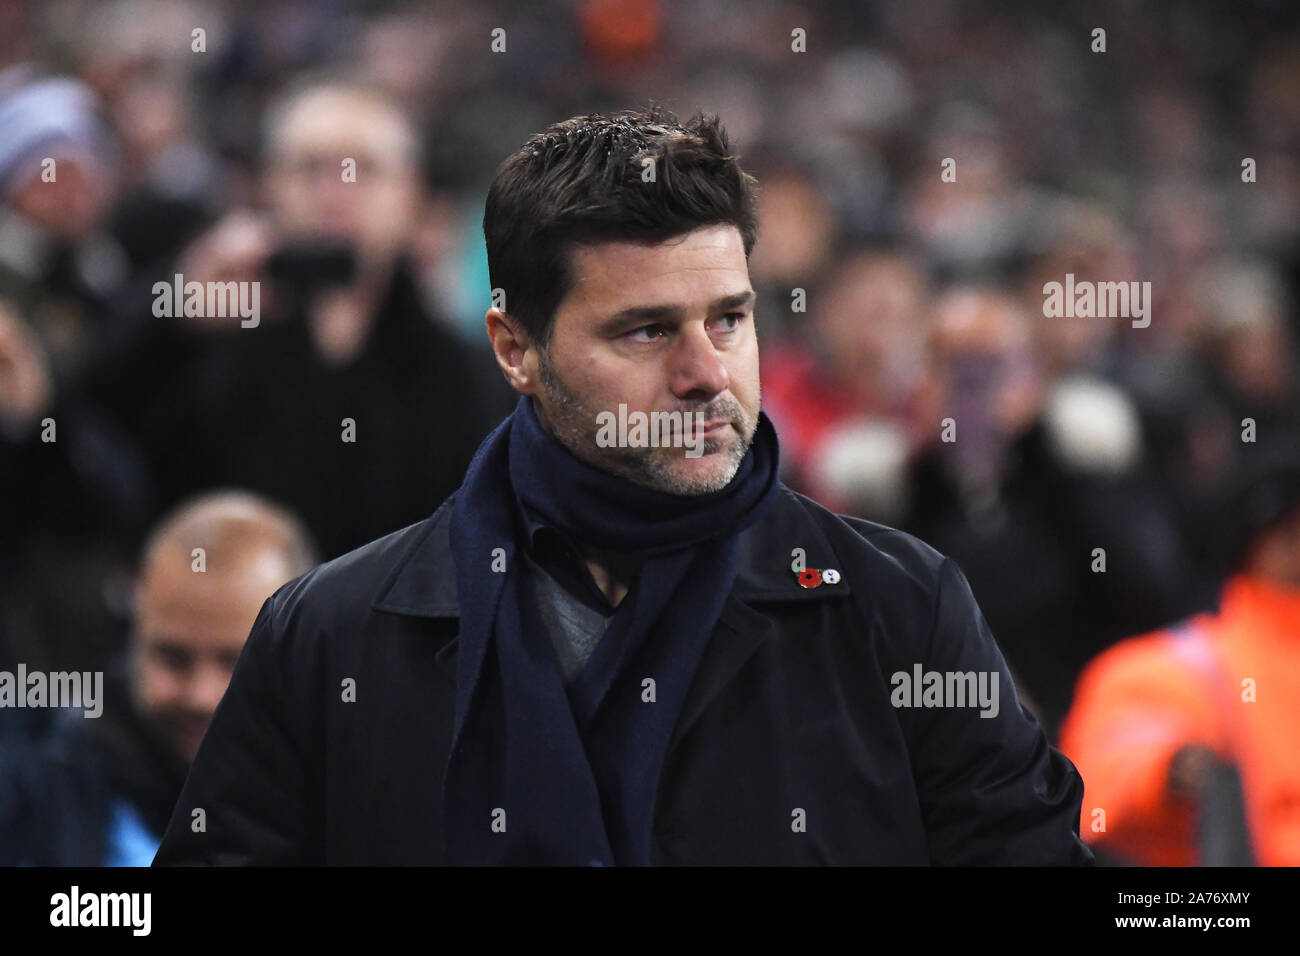 LONDON, ENGLAND - OCTOBER 29, 2018: pictured prior to the 2018/19 English Premier League game between Tottenham Hotspur and Manchester City at Wembley Stadium. Stock Photo